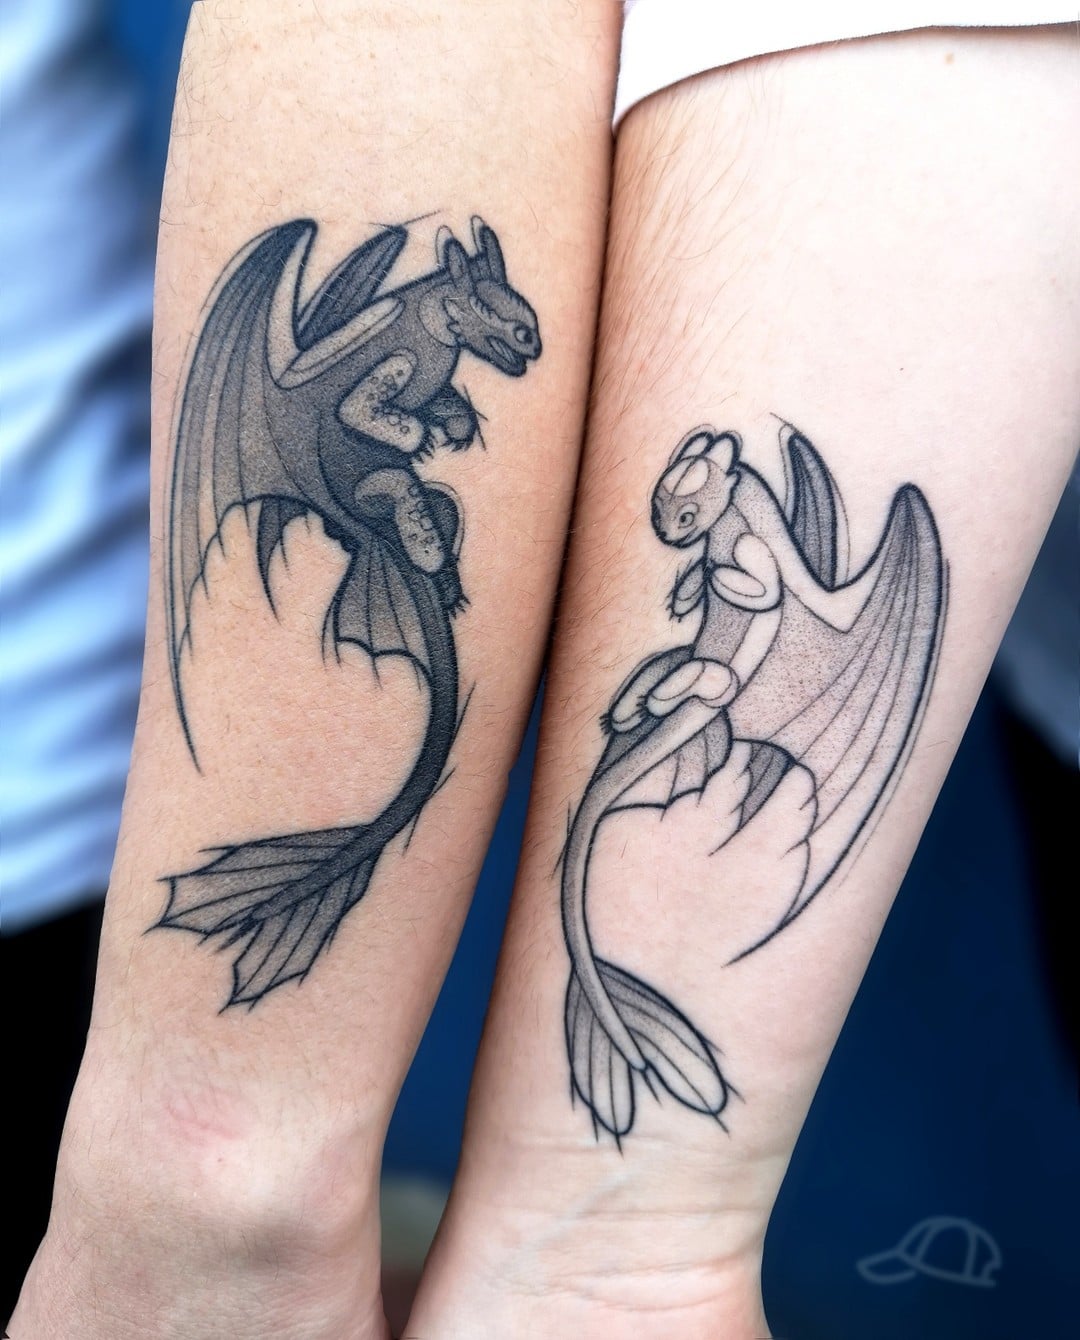 Dragon Ball Z Tattoo for Couple - Best Tattoo Ideas Gallery